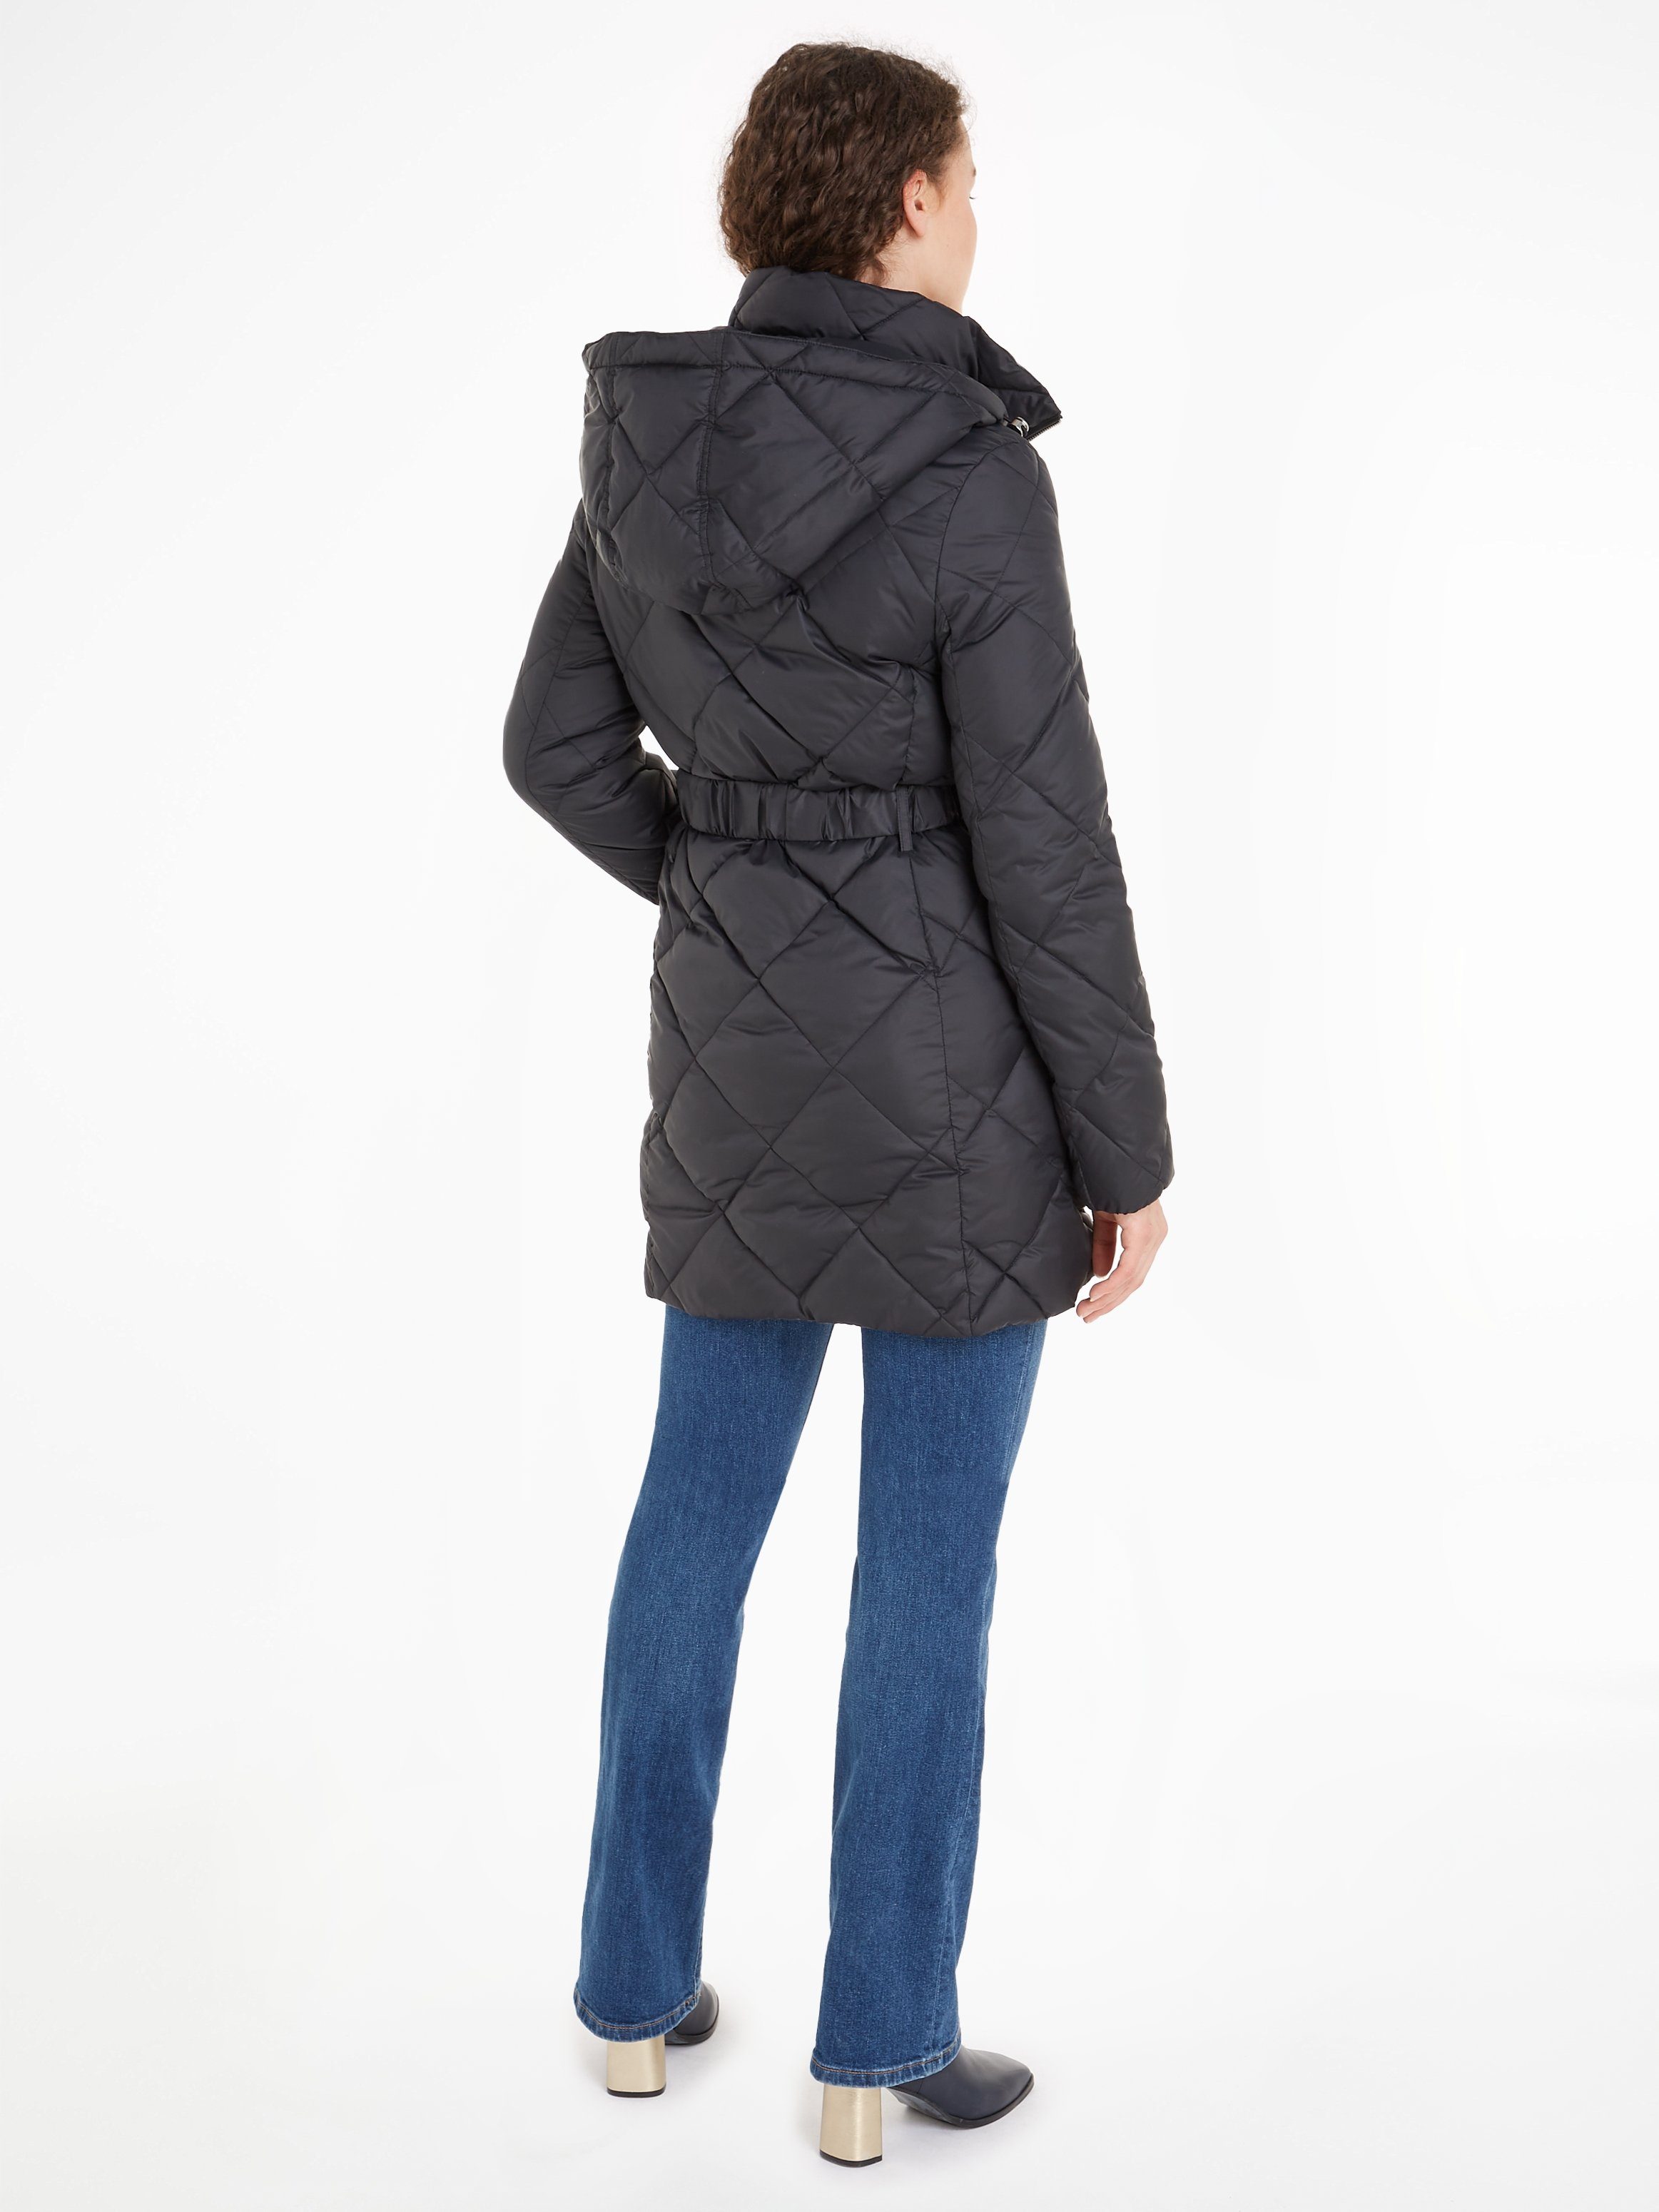 Steppmantel Hilfiger Tommy QUILTED ELEVATED BELTED mit abnehmbarer Kapuze COAT